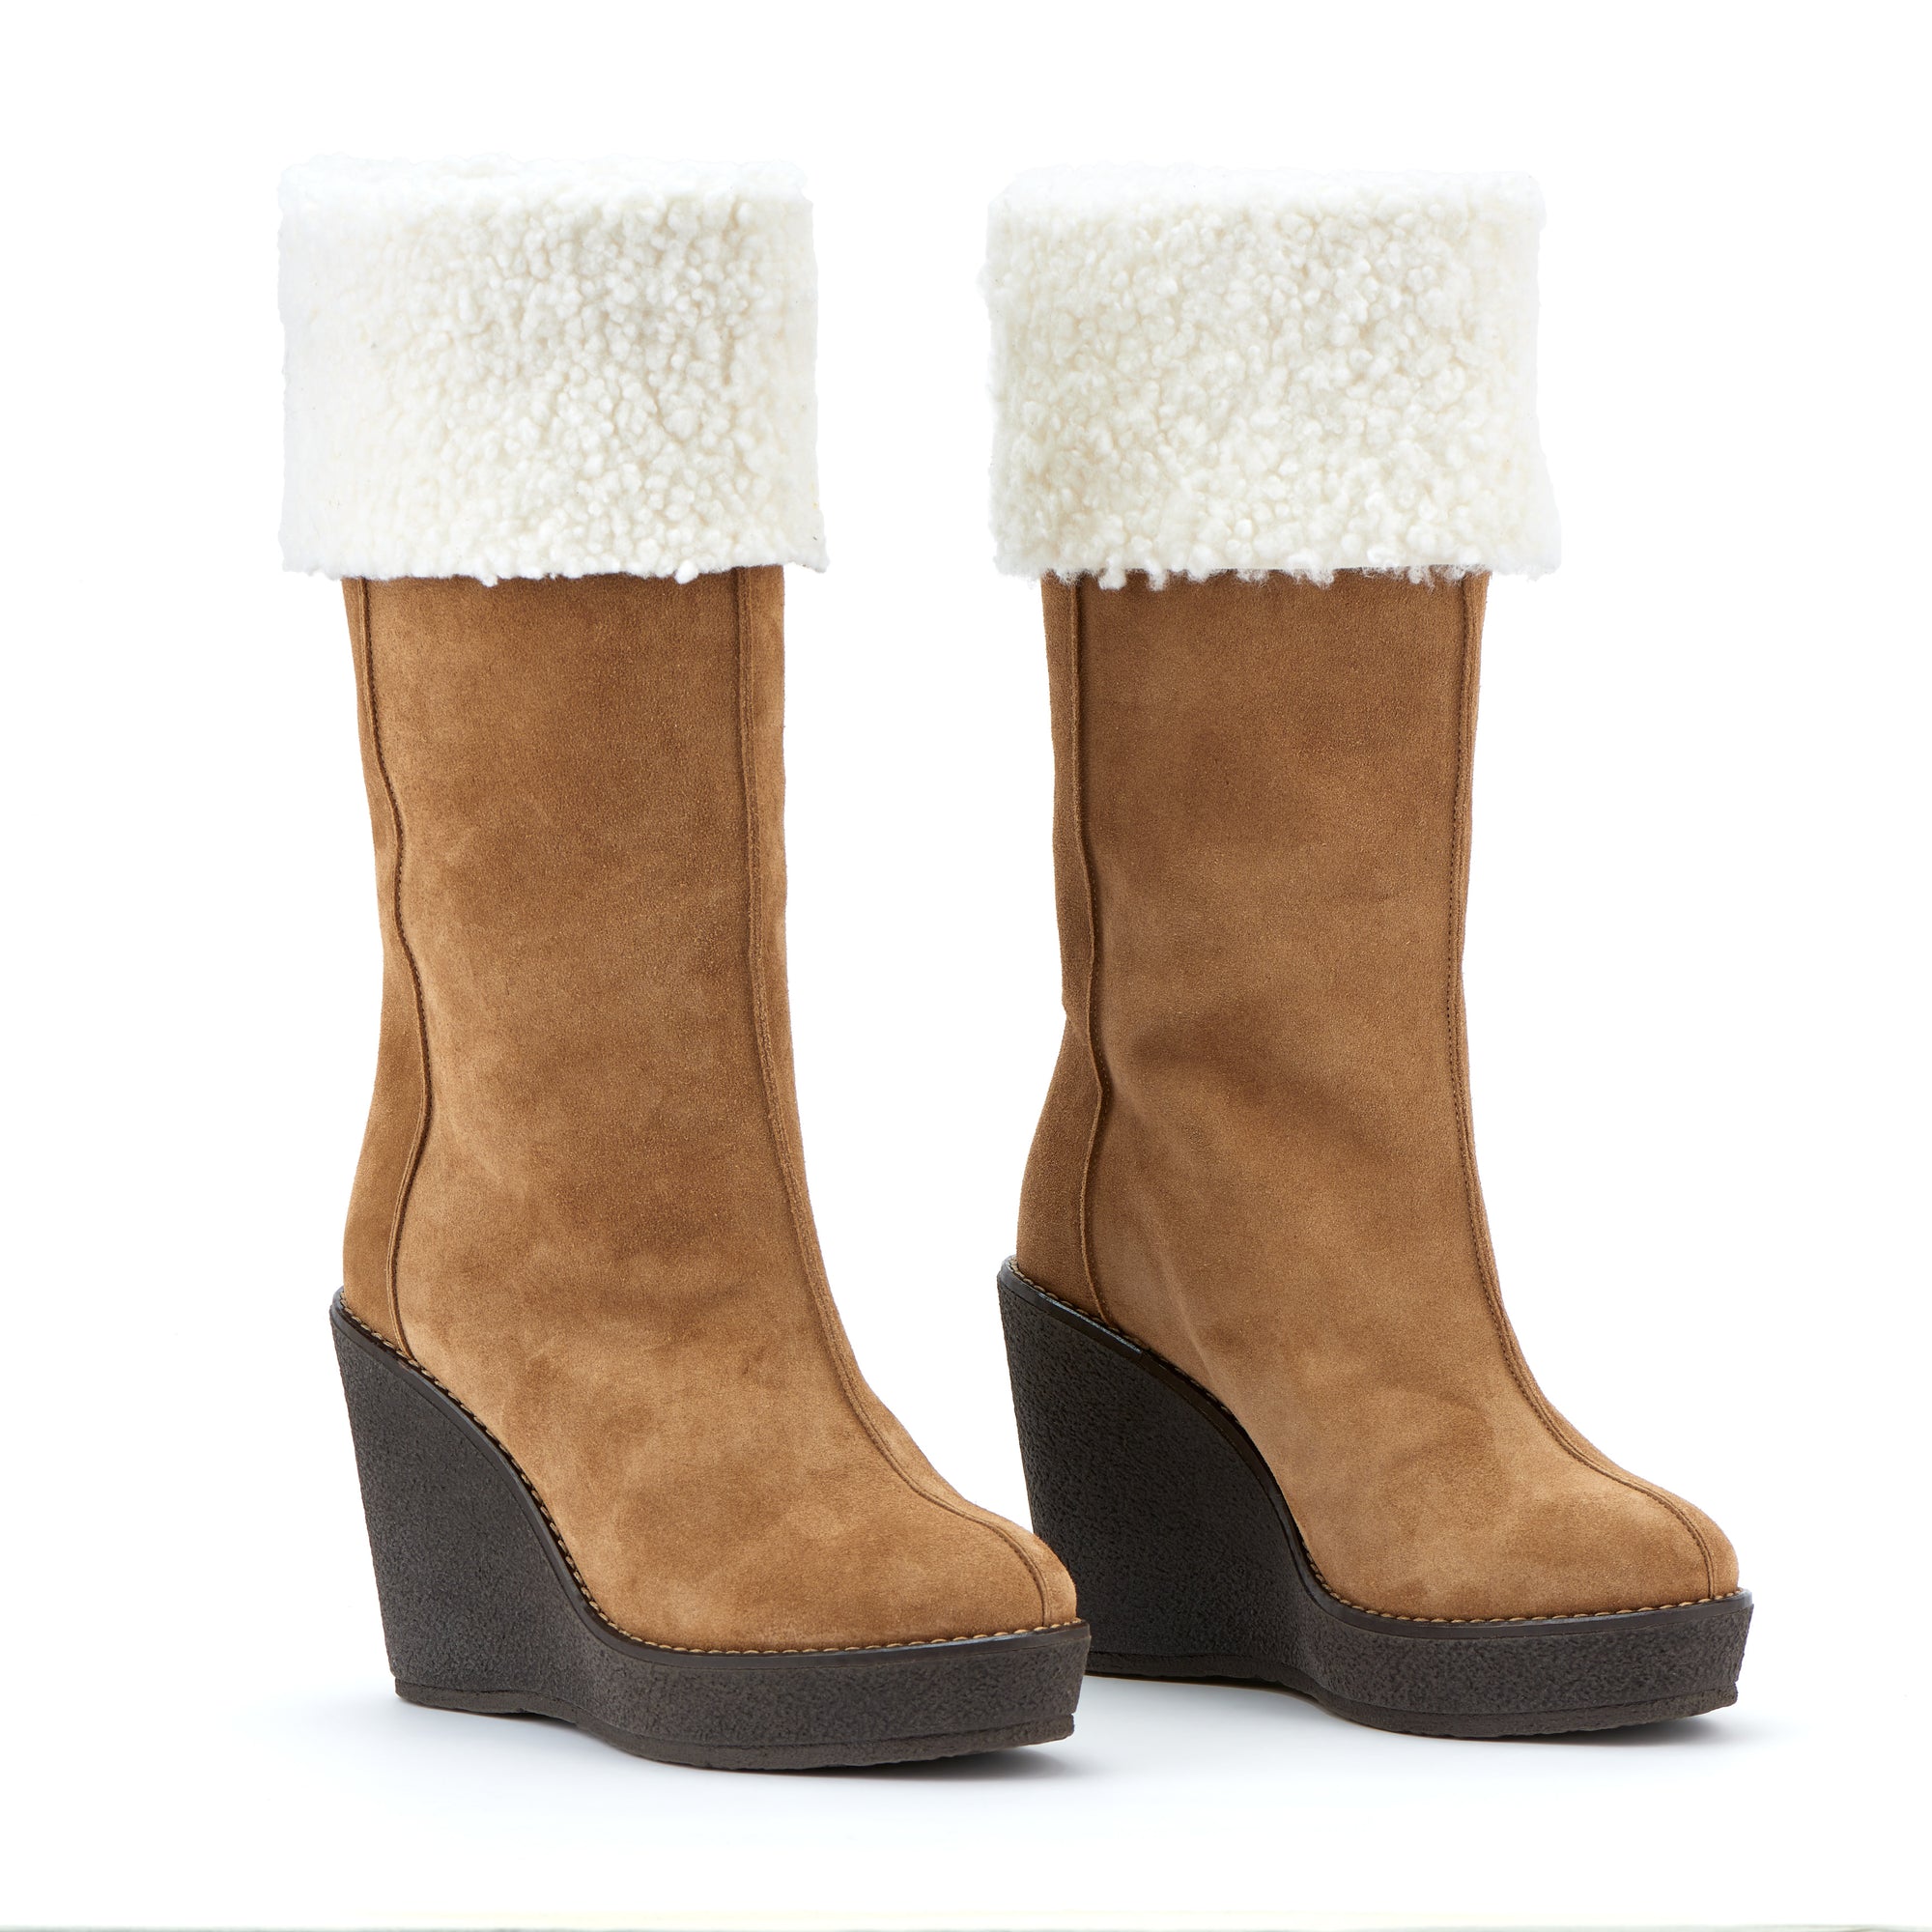 Camilla 100 wedge heel ankle boots in calfhair - Sand